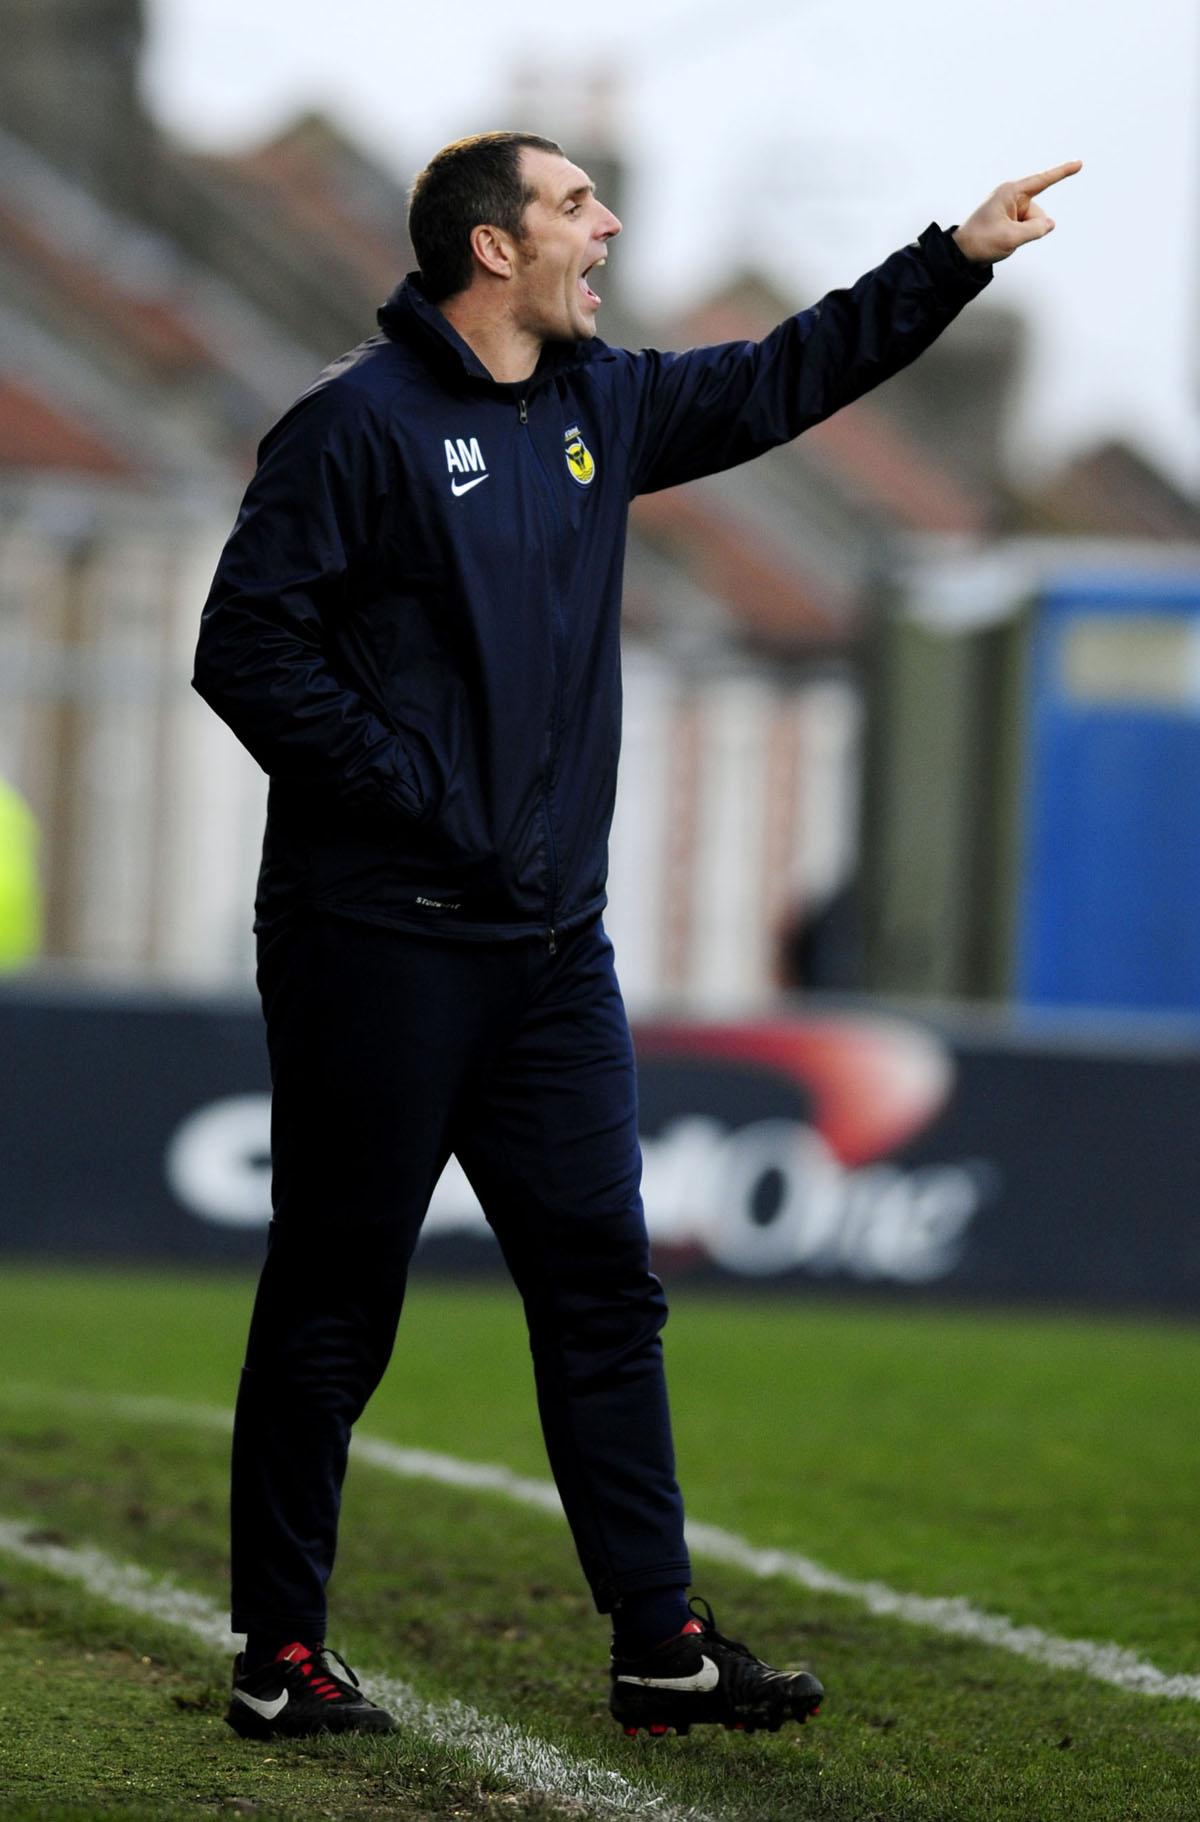 Pictures from Oxford United playing Bristol Rovers away on Saturday 8th February 2014